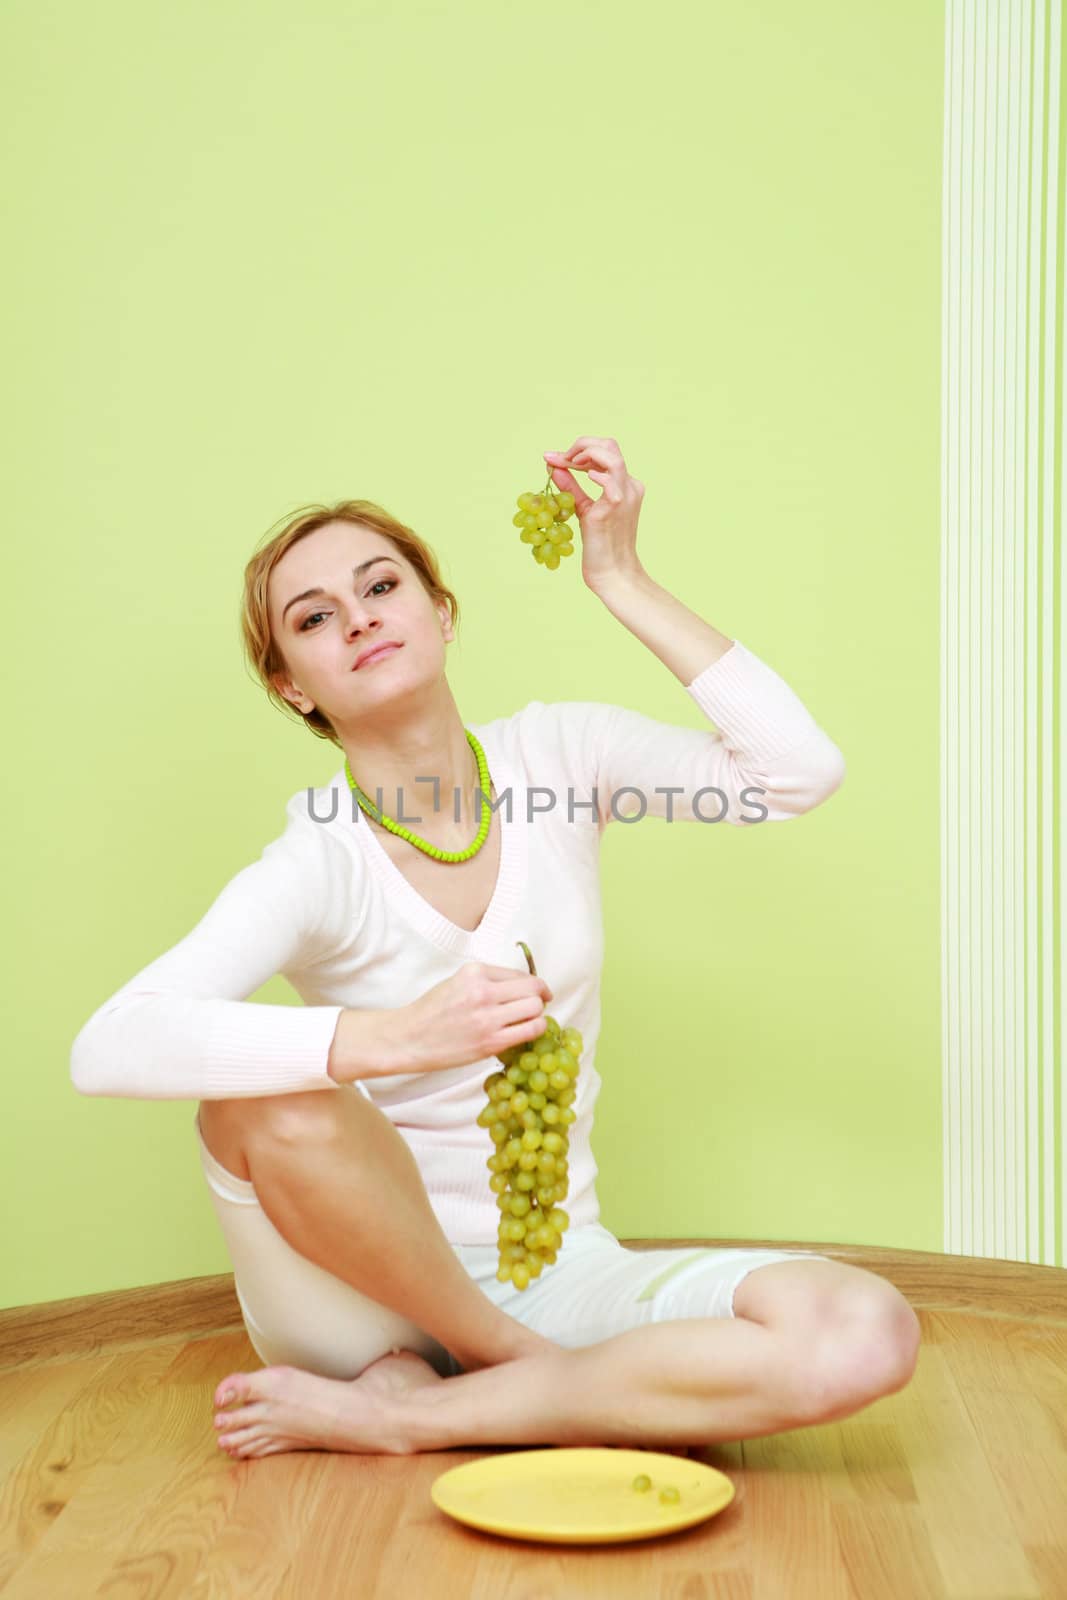 An image of a girl with a bunch of grapes